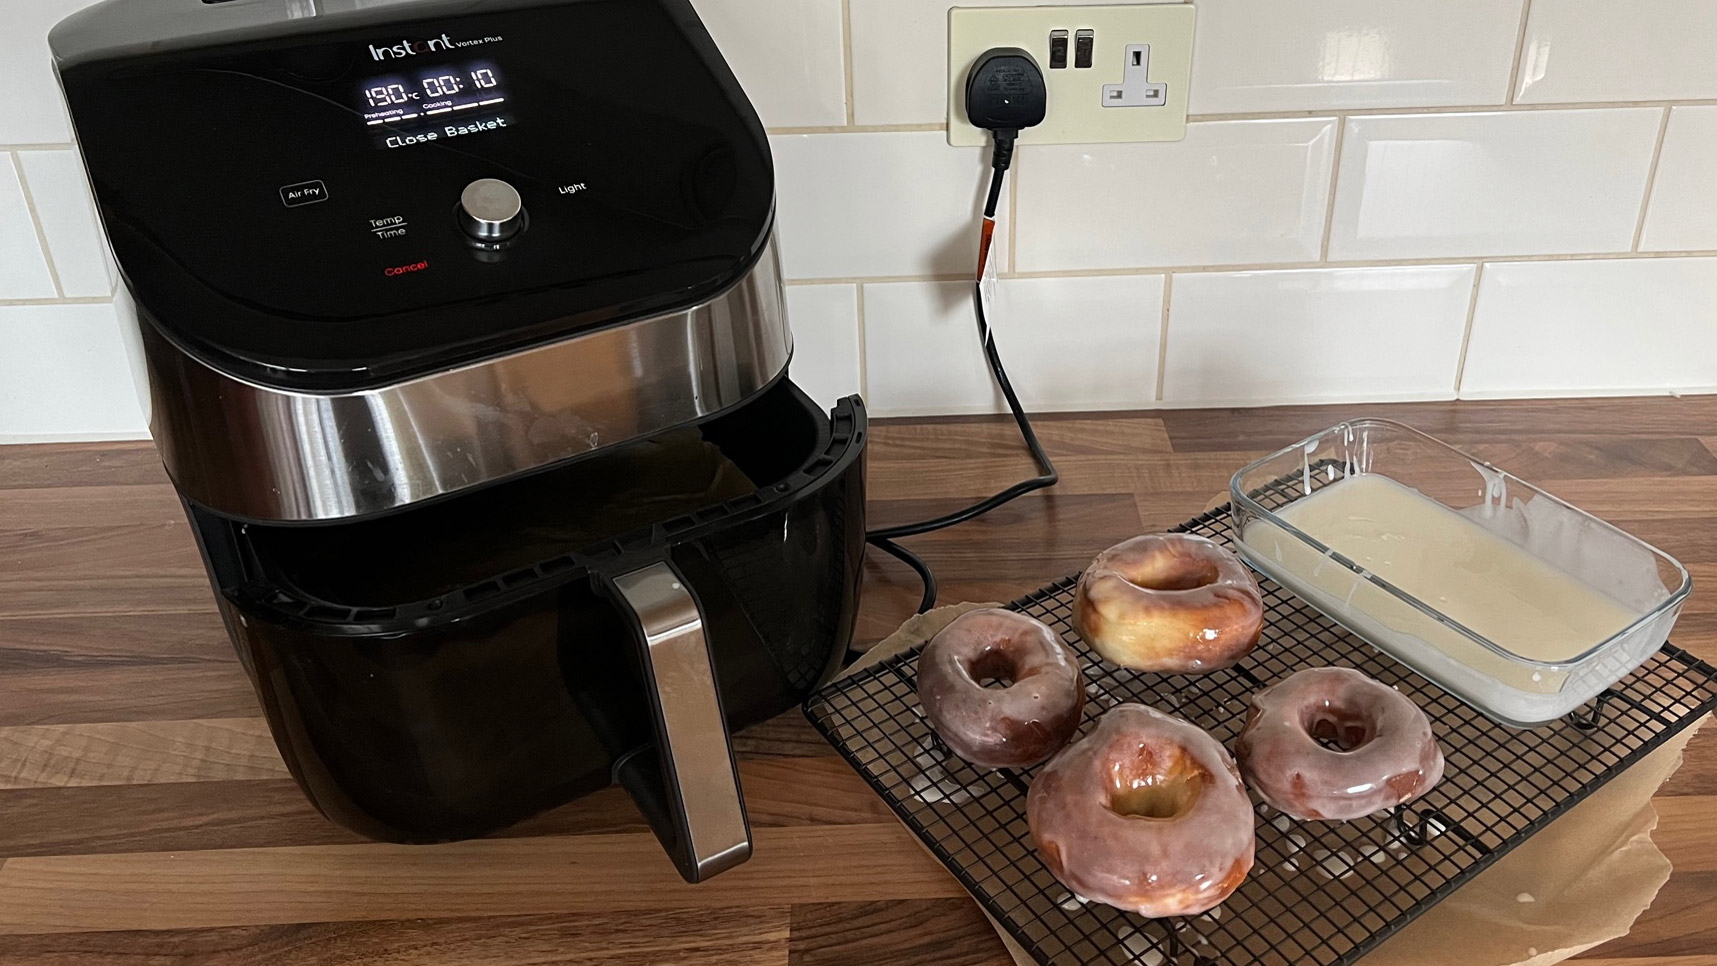 The first attempt at cooking donuts in an air fryer, that were then glazed